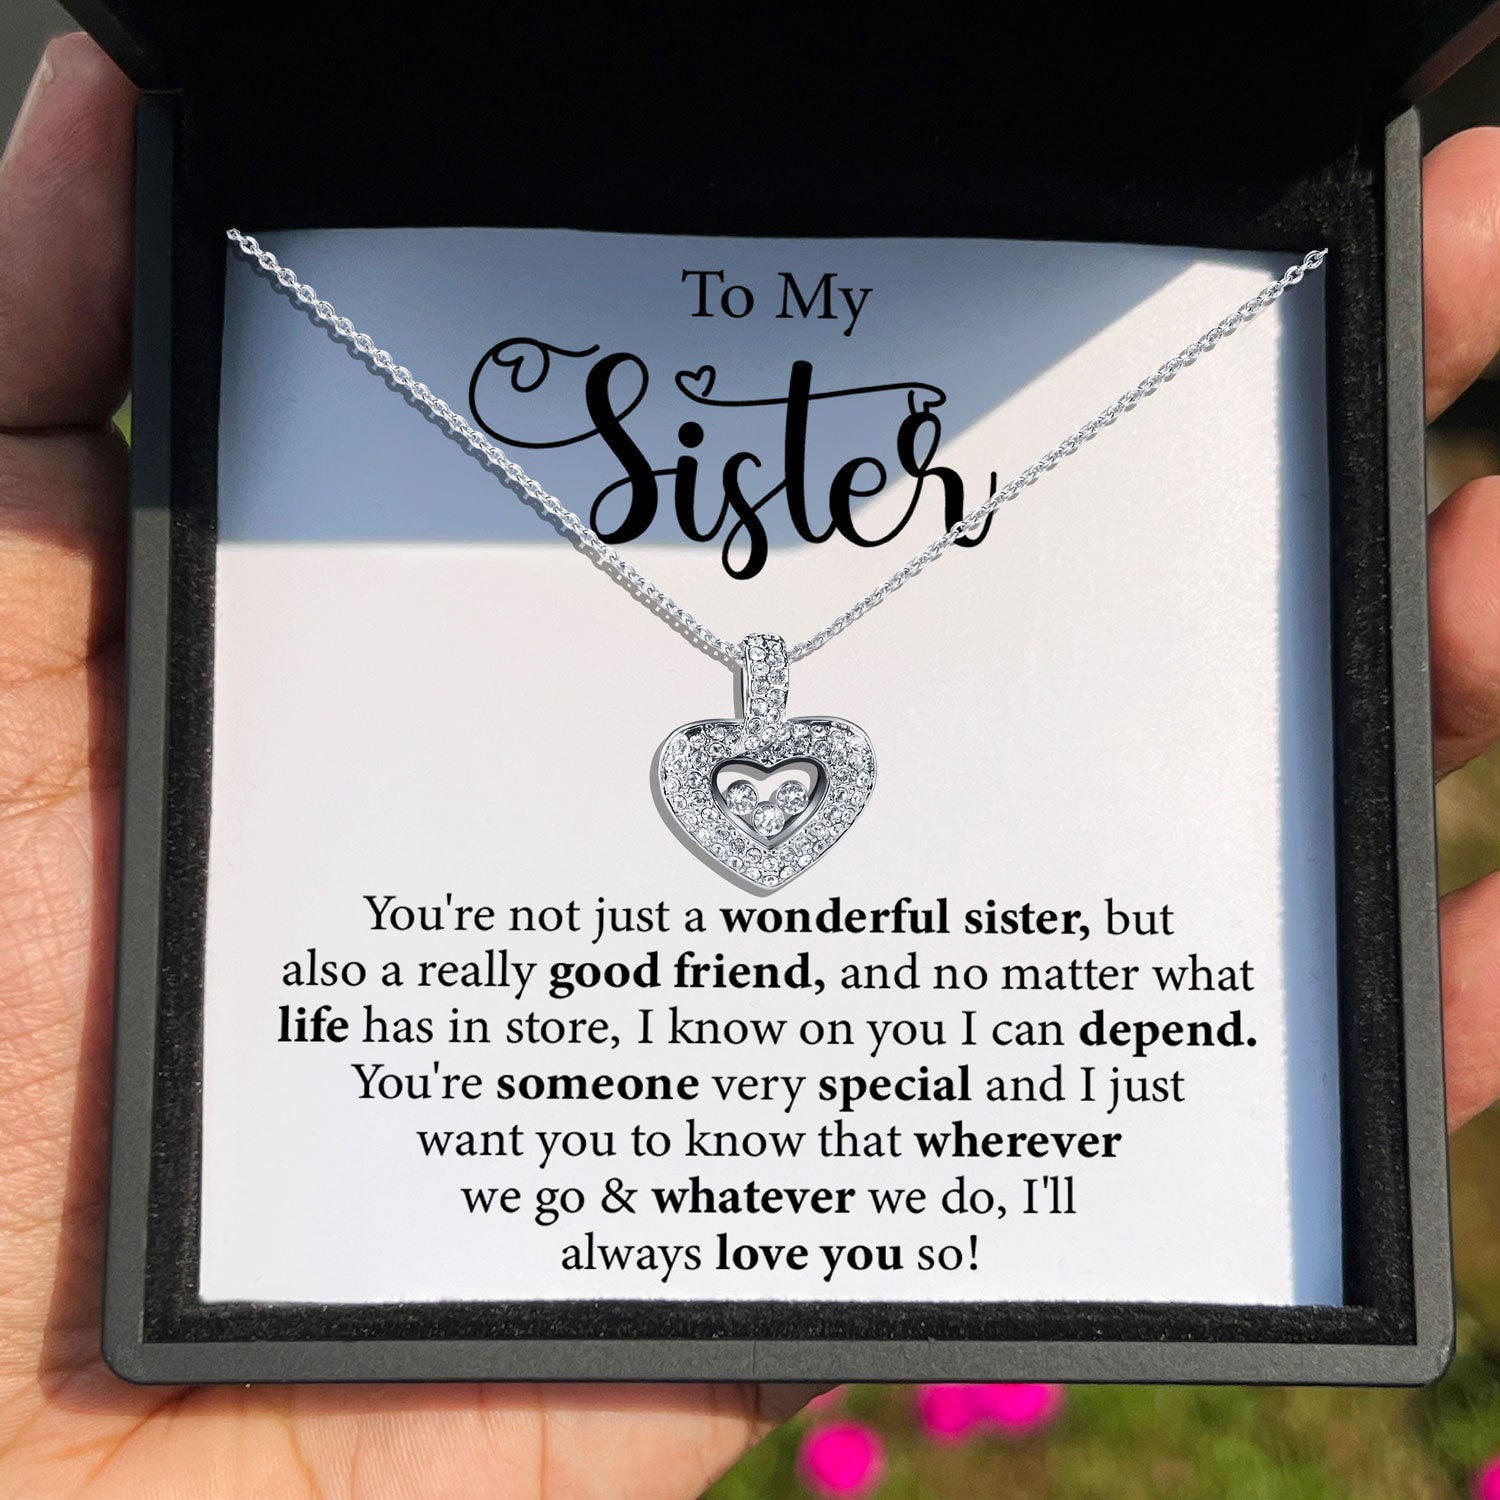 To My Sister - I'll Always Love You So! - Tryndi Floating Heart Necklace